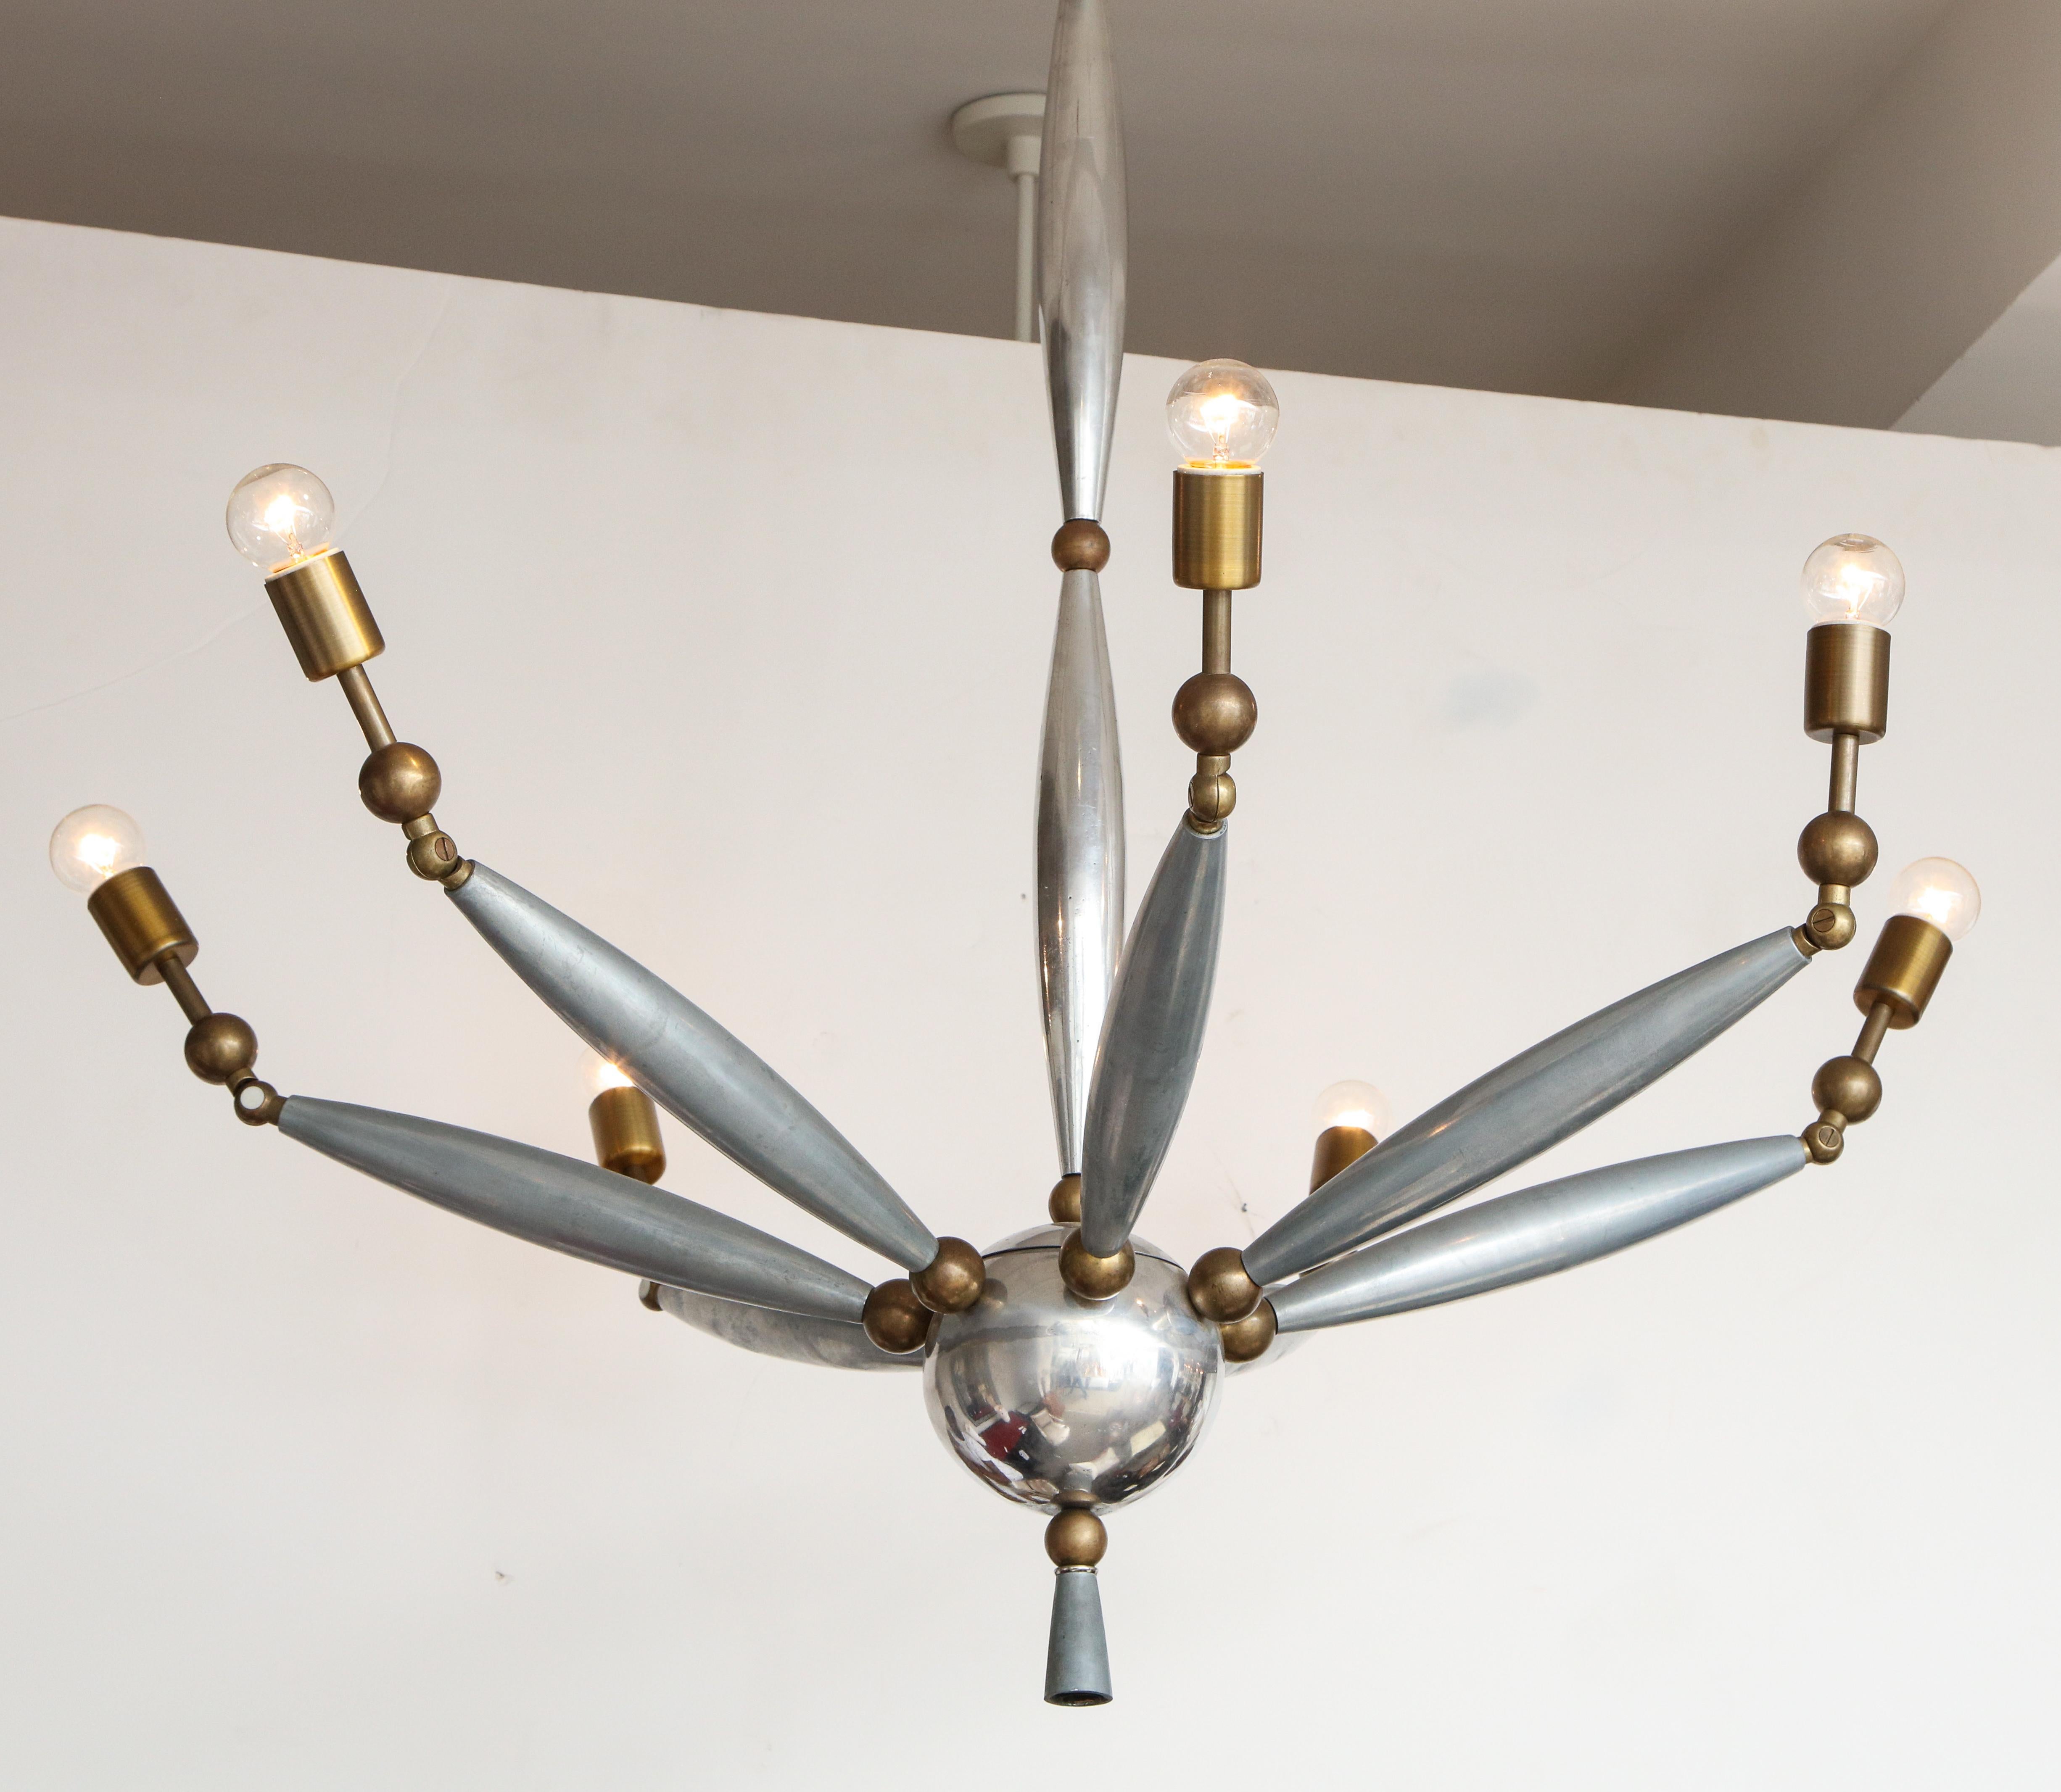 Italian midcentury chrome and brass chandelier with articulating arms.